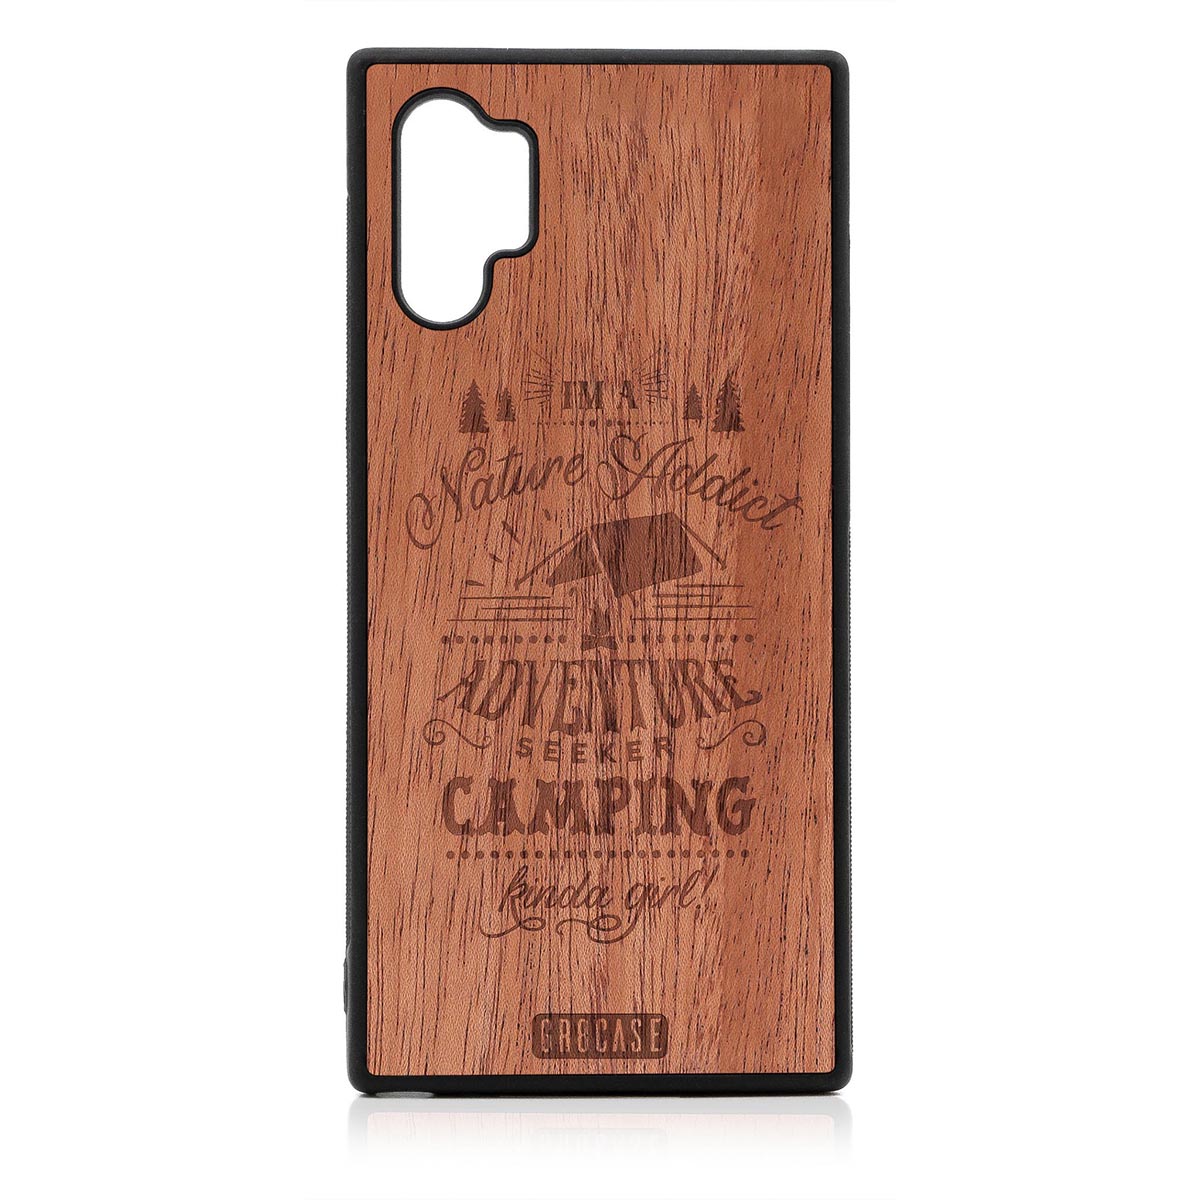 I'm A Nature Addict Adventure Seeker Camping Kinda Girl Design Wood Case Samsung Galaxy Note 10 Plus by GR8CASE